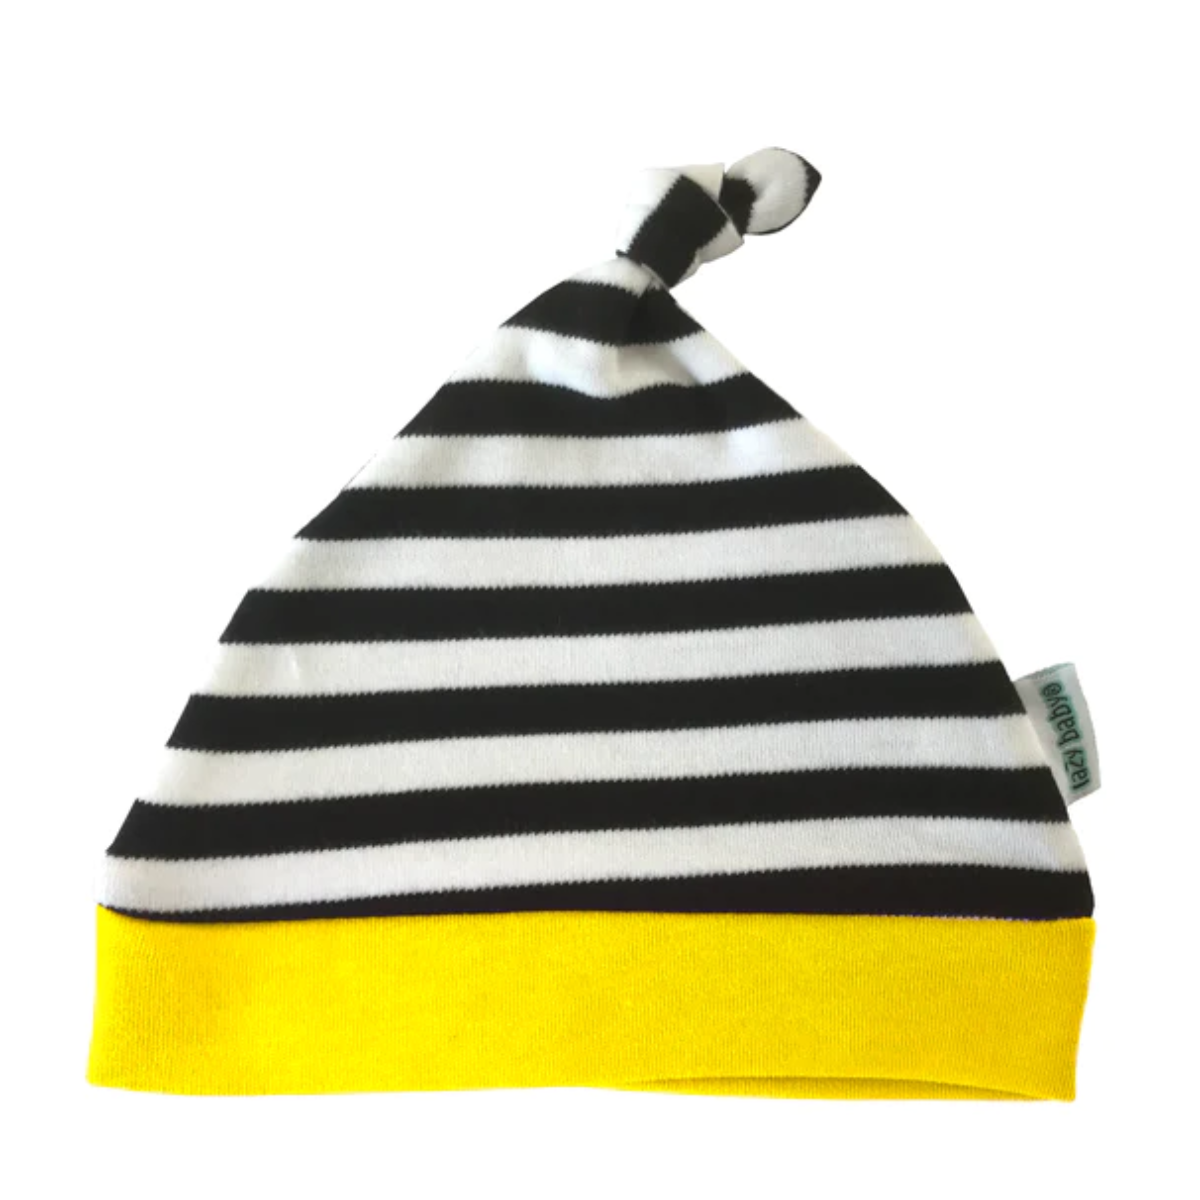 Black and white stripy hat with yellow edge trim and knot detail